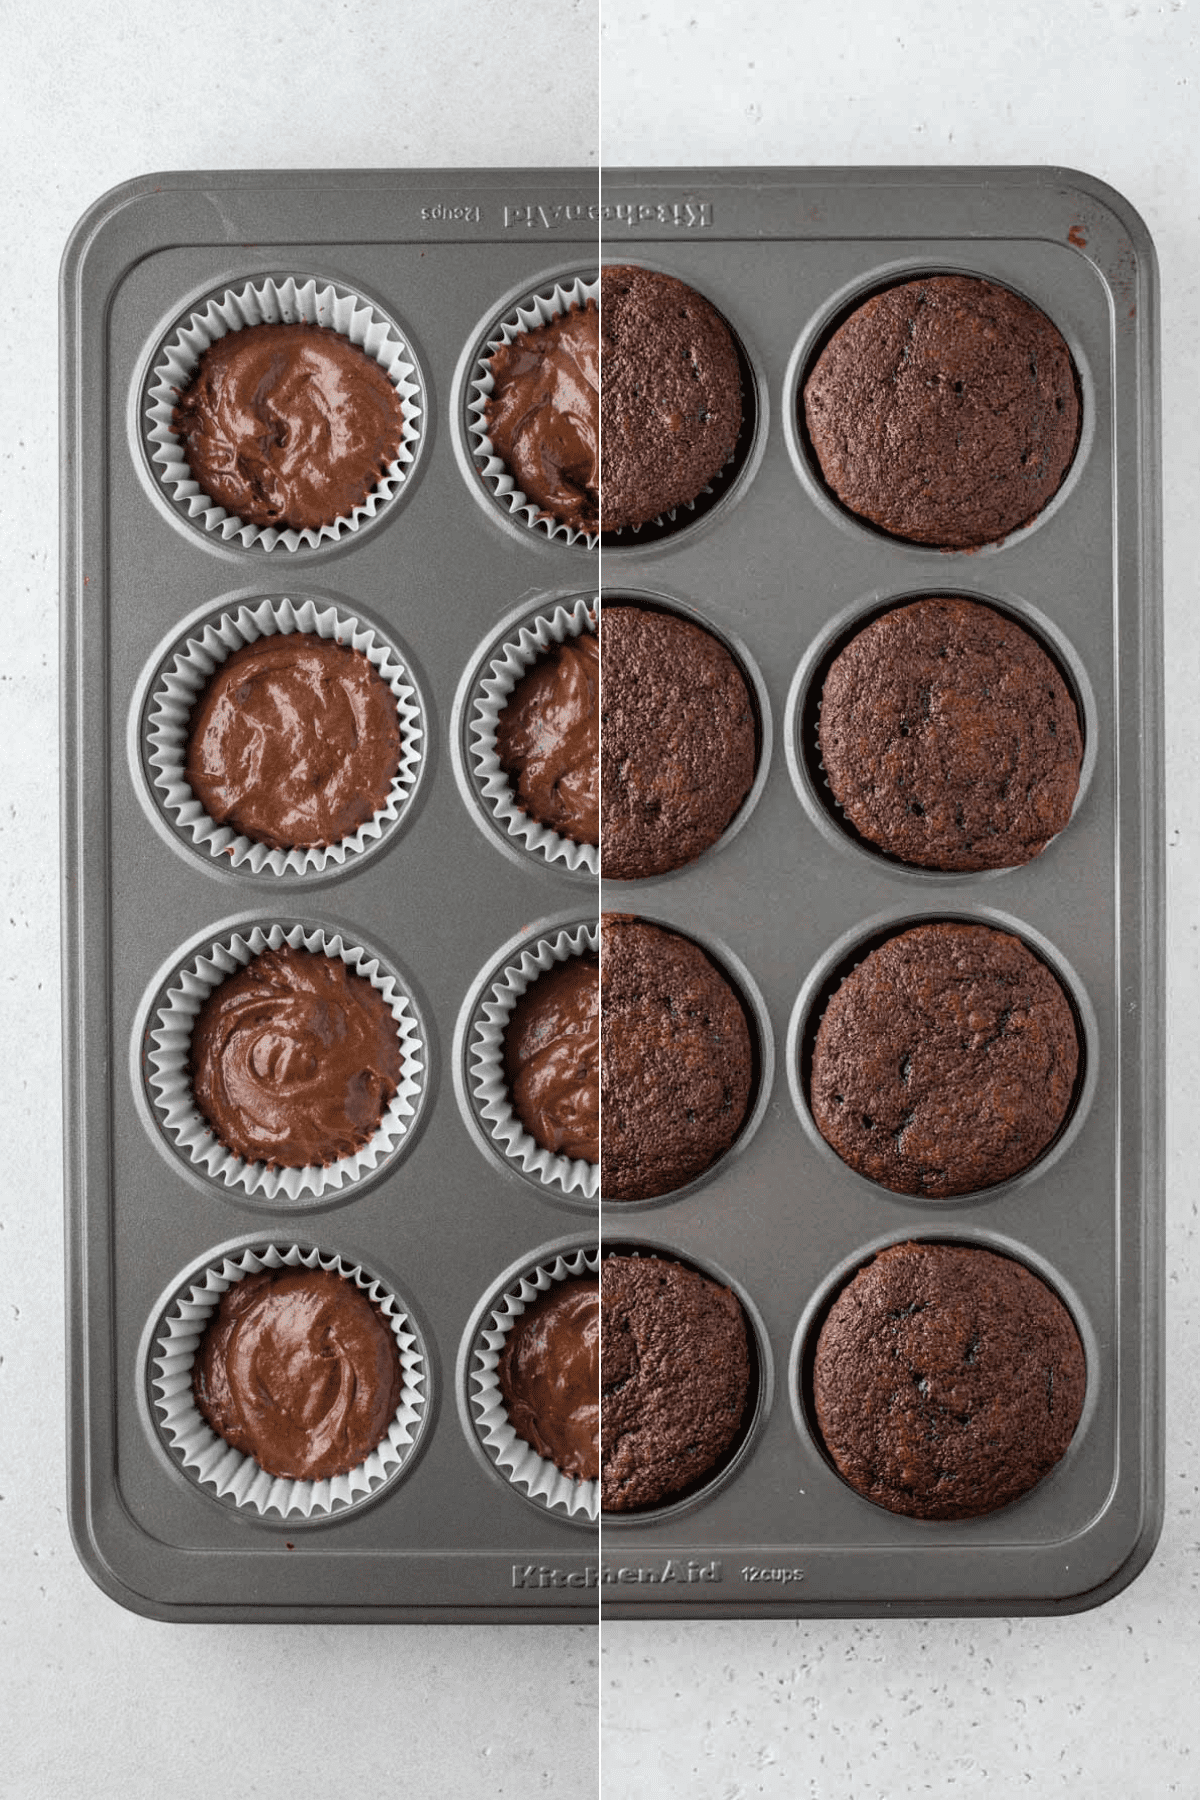 Two photos showing unbaked and baked gluten-free chocolate cupcakes